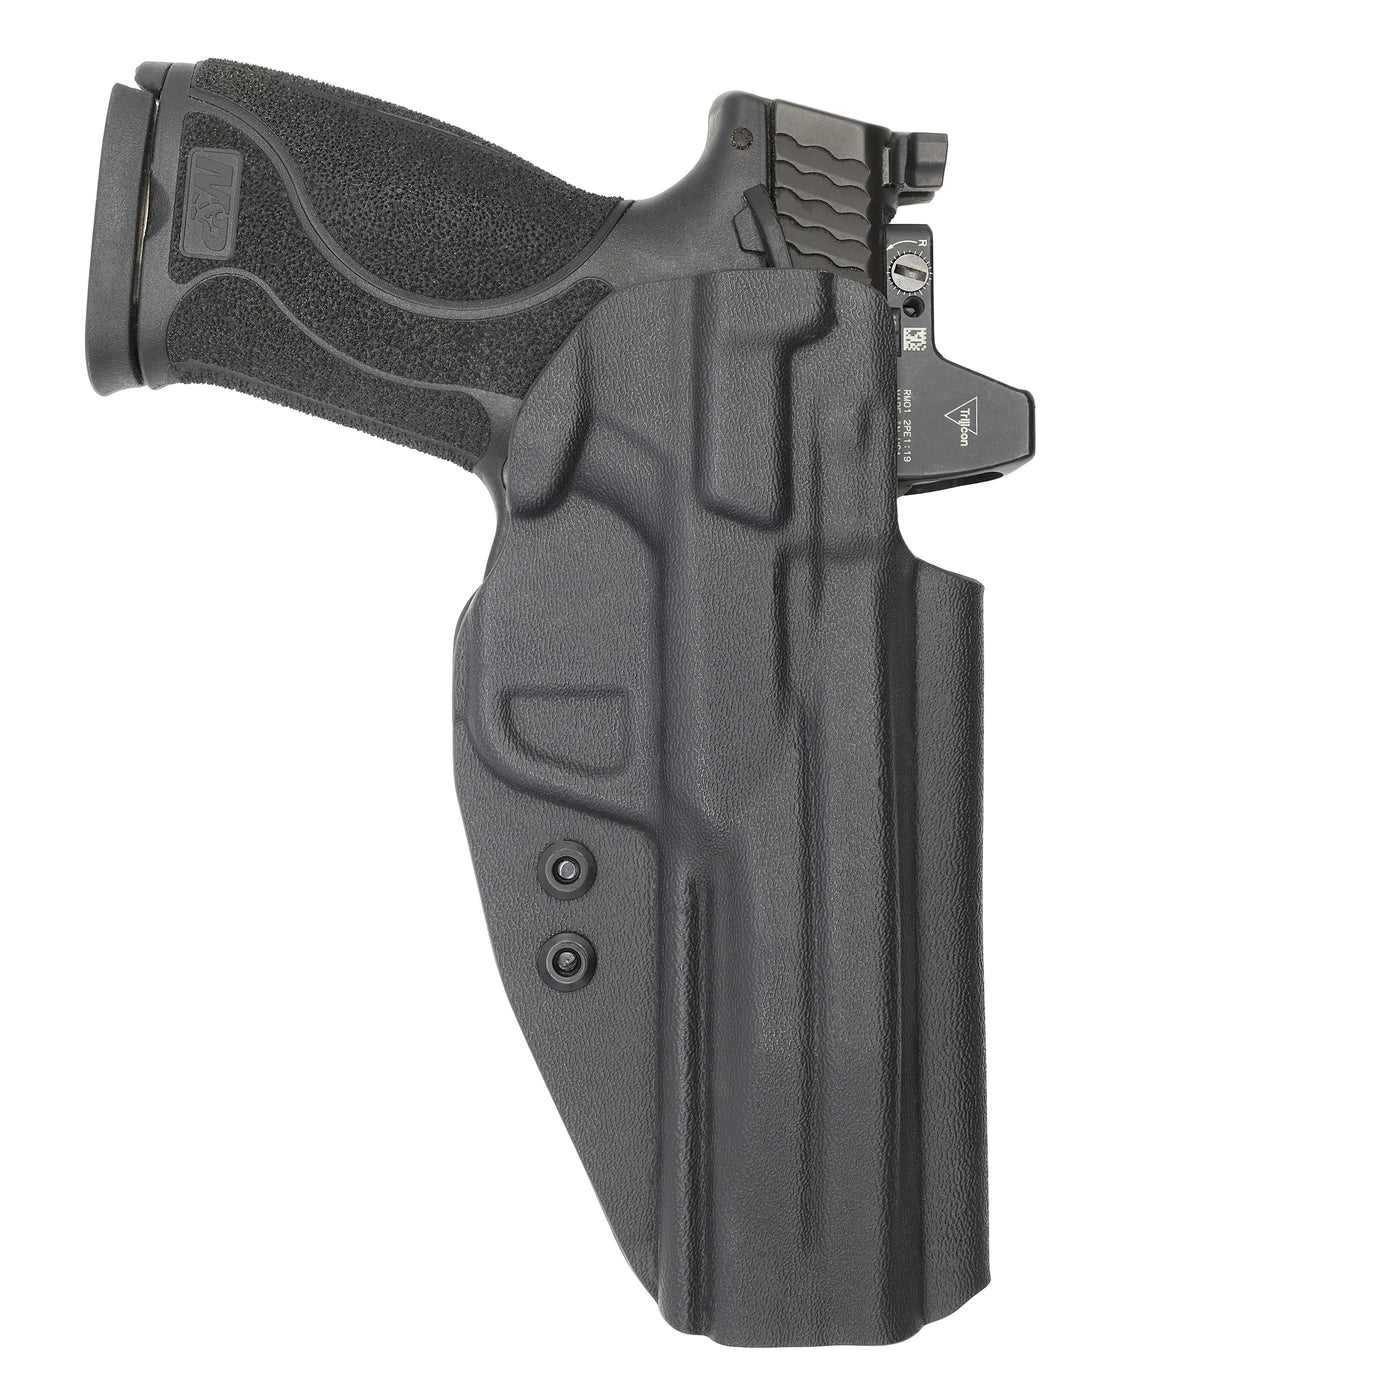 C&G Holsters quickship IWB Covert M&P 10/45 5" LEFT HAND in holstered position back view